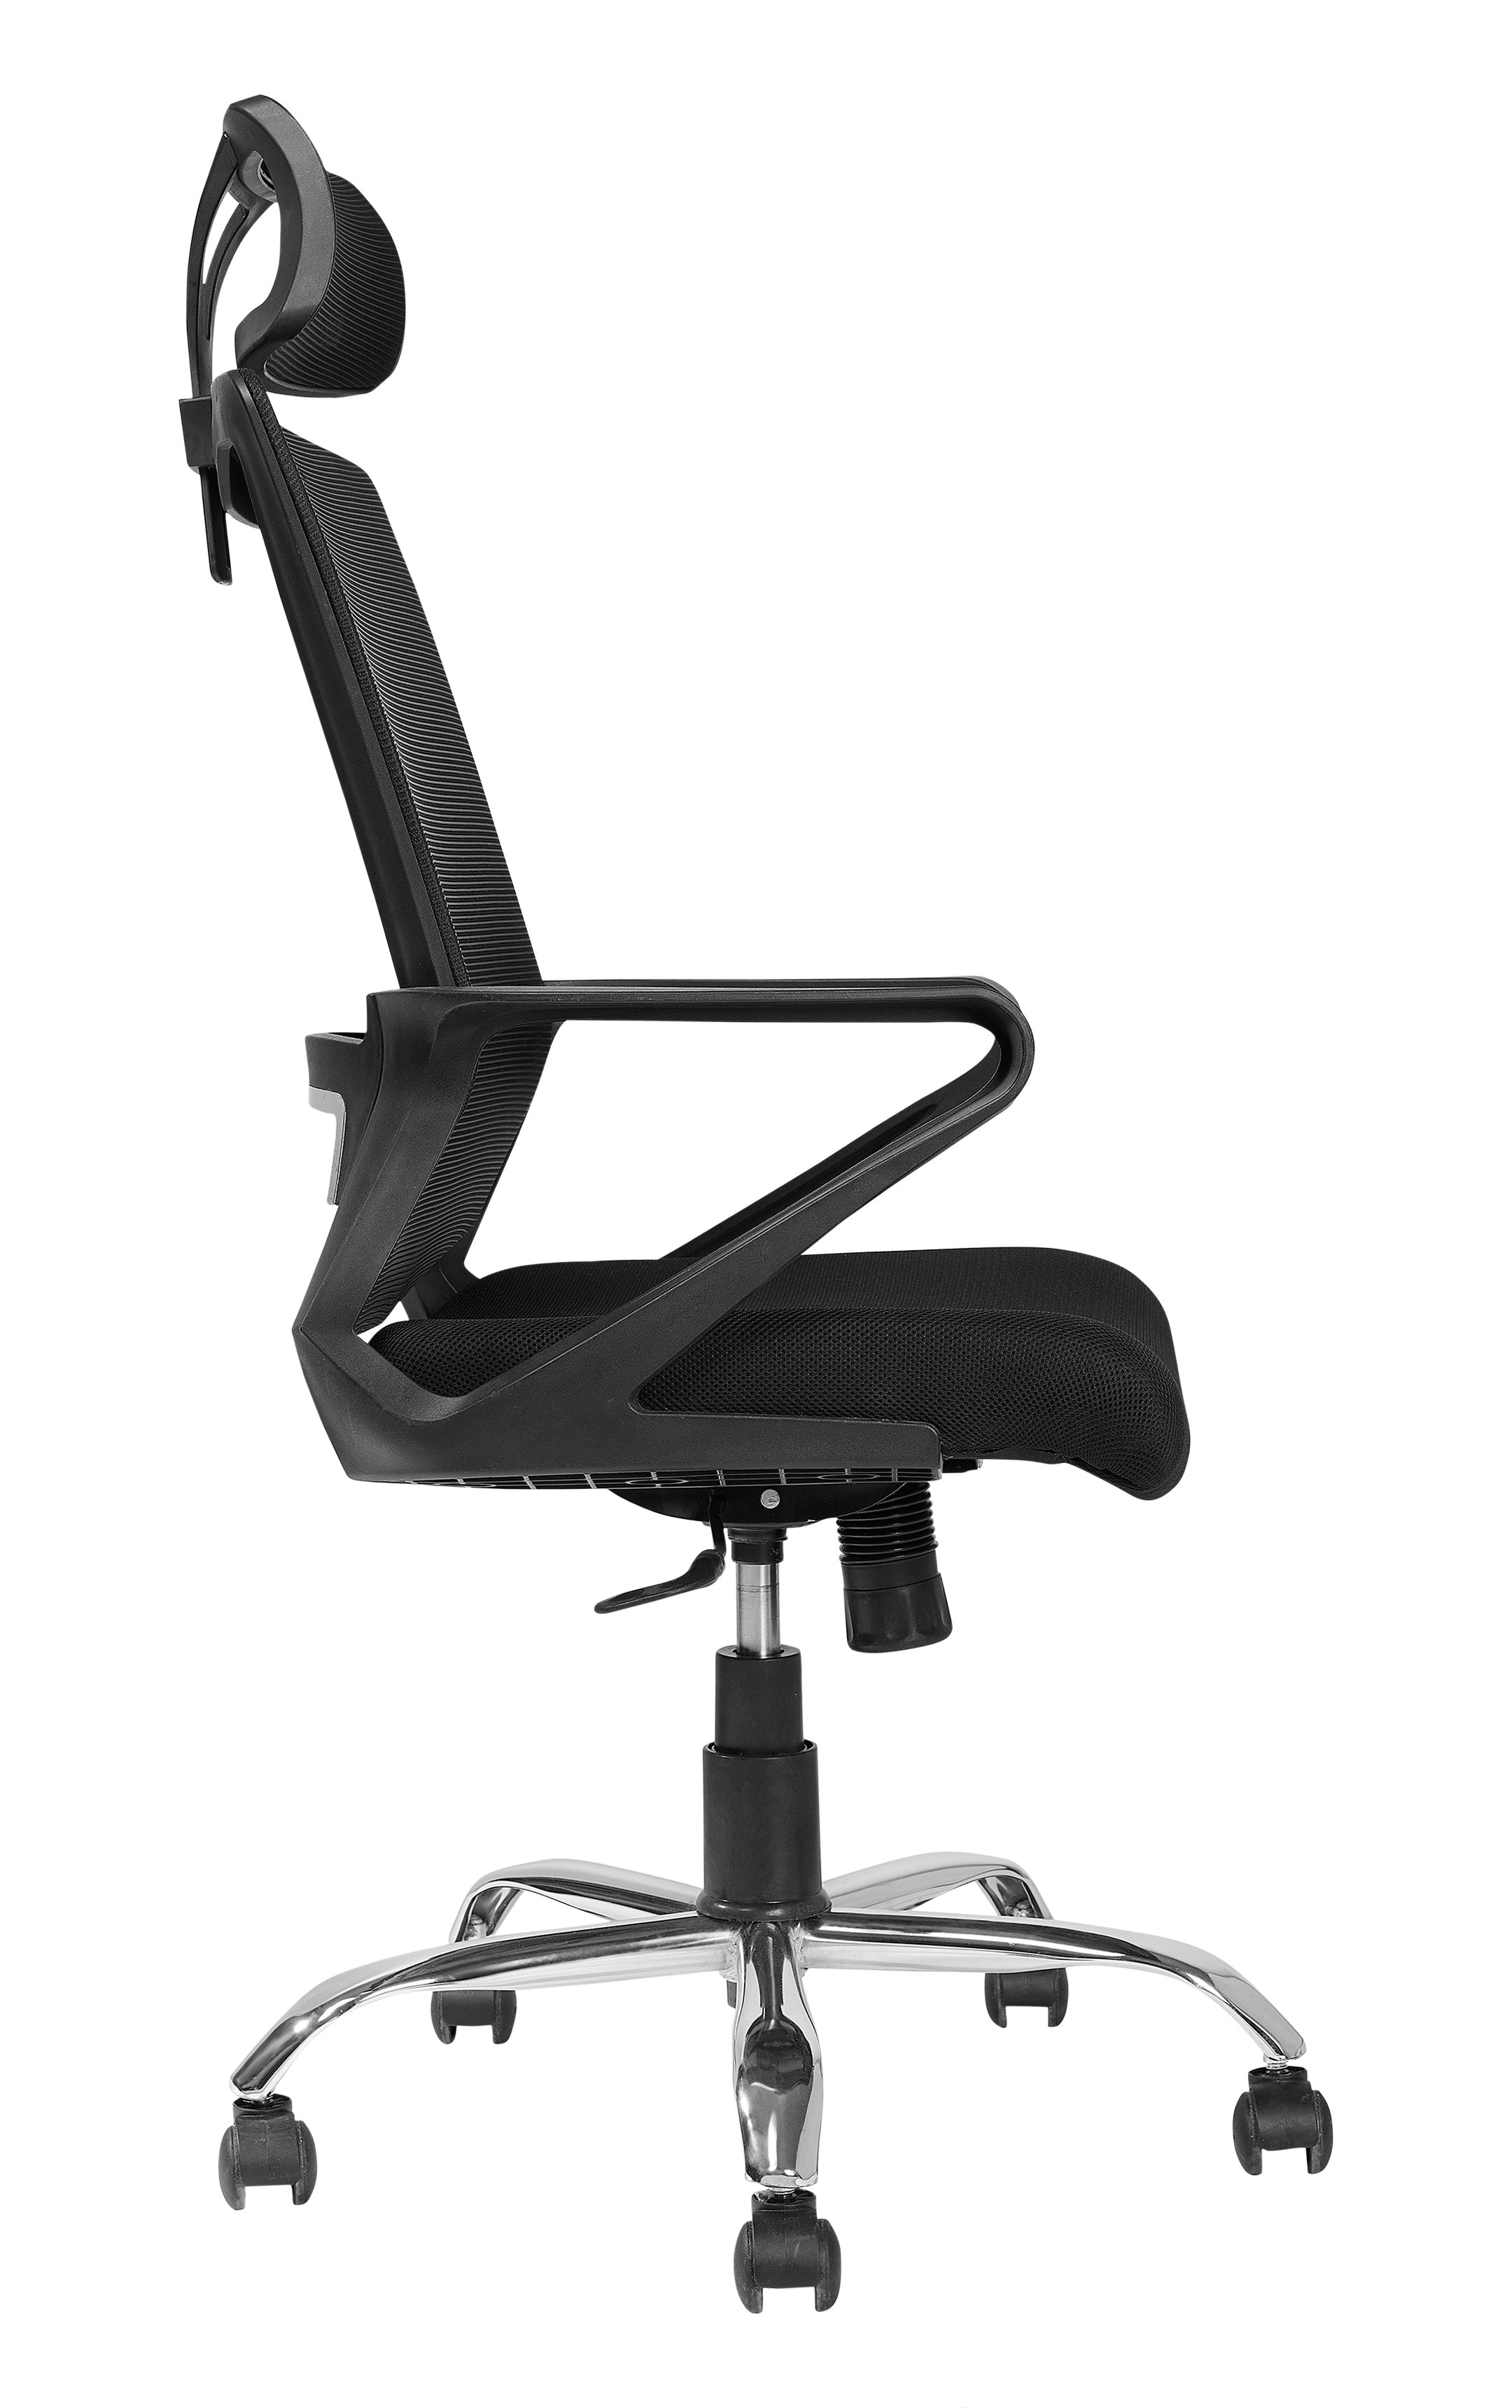 Rico High Back Ergonomic Office Chair With Cushion Seat And Chrome Base - Black